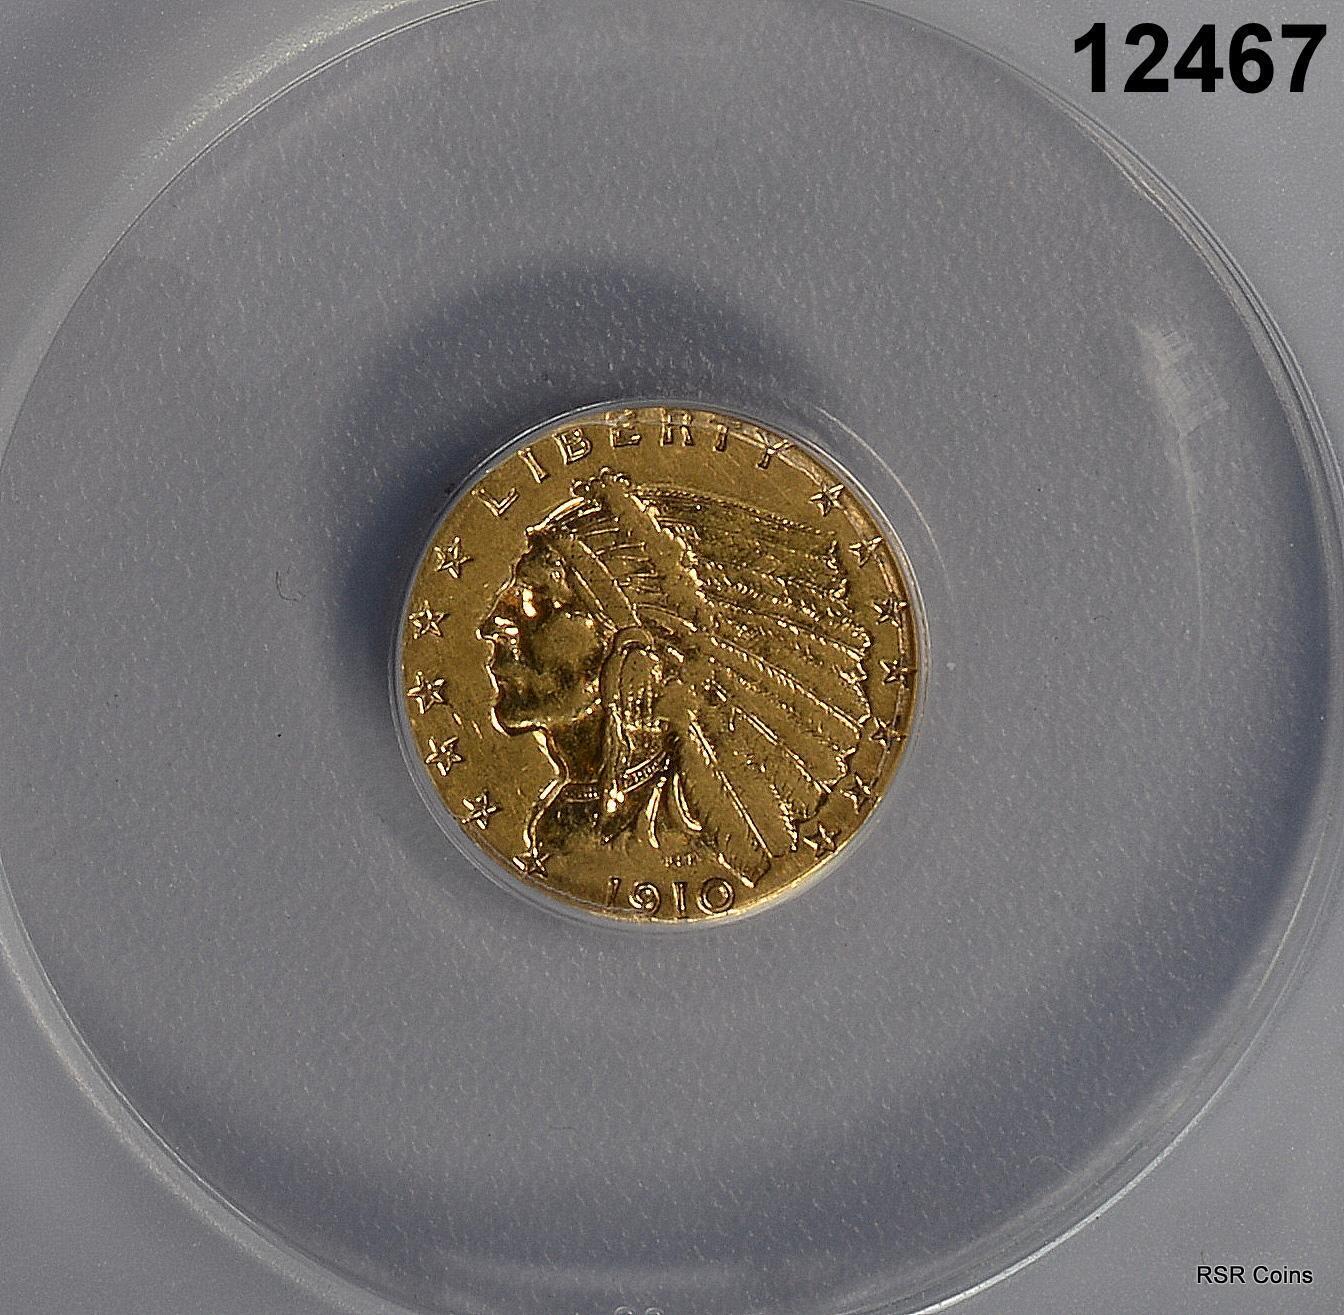 1910 $2.50 GOLD INDIAN ANACS CERTIFIED EF45 EX JEWELRY POLISHED #12467